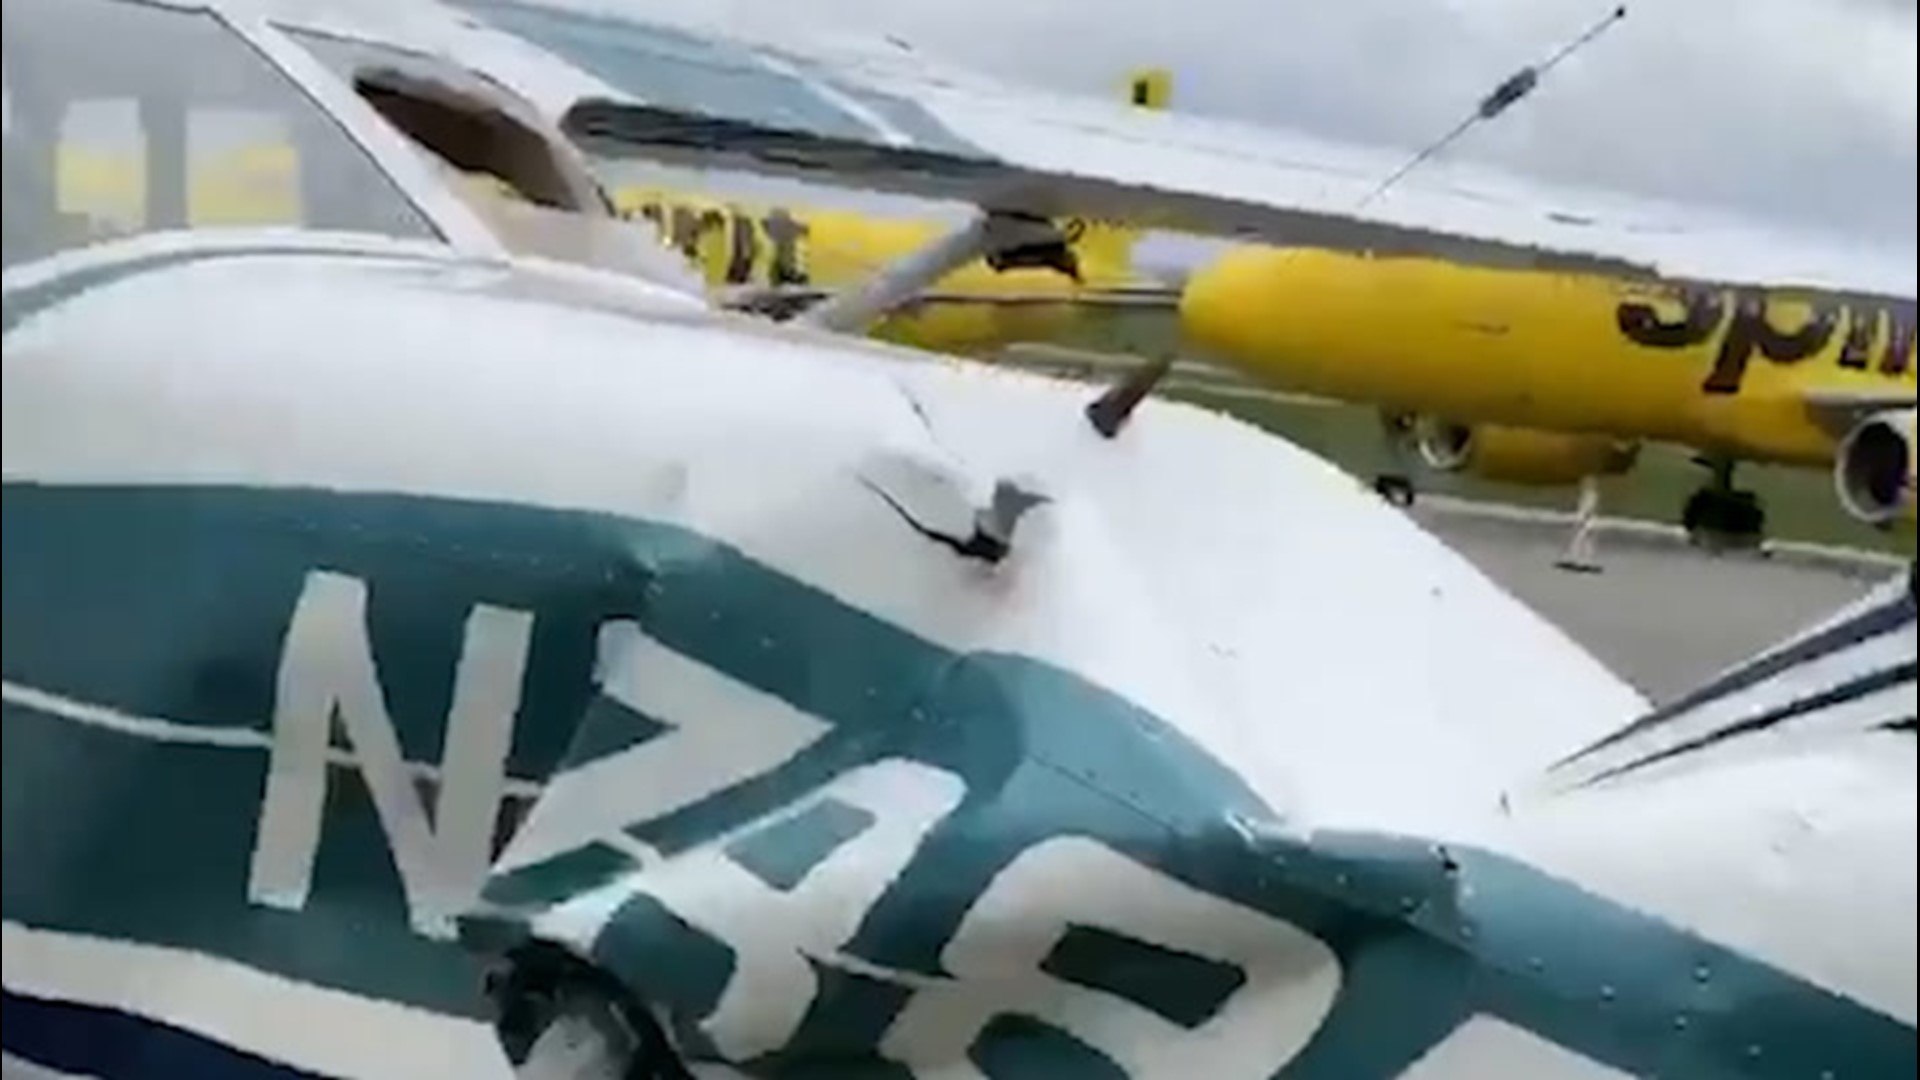 A plane was damaged by high winds during a thunderstorm at Arnold Palmer Regional Airport in Latrobe, Pennsylvania, early on the morning of April 7.